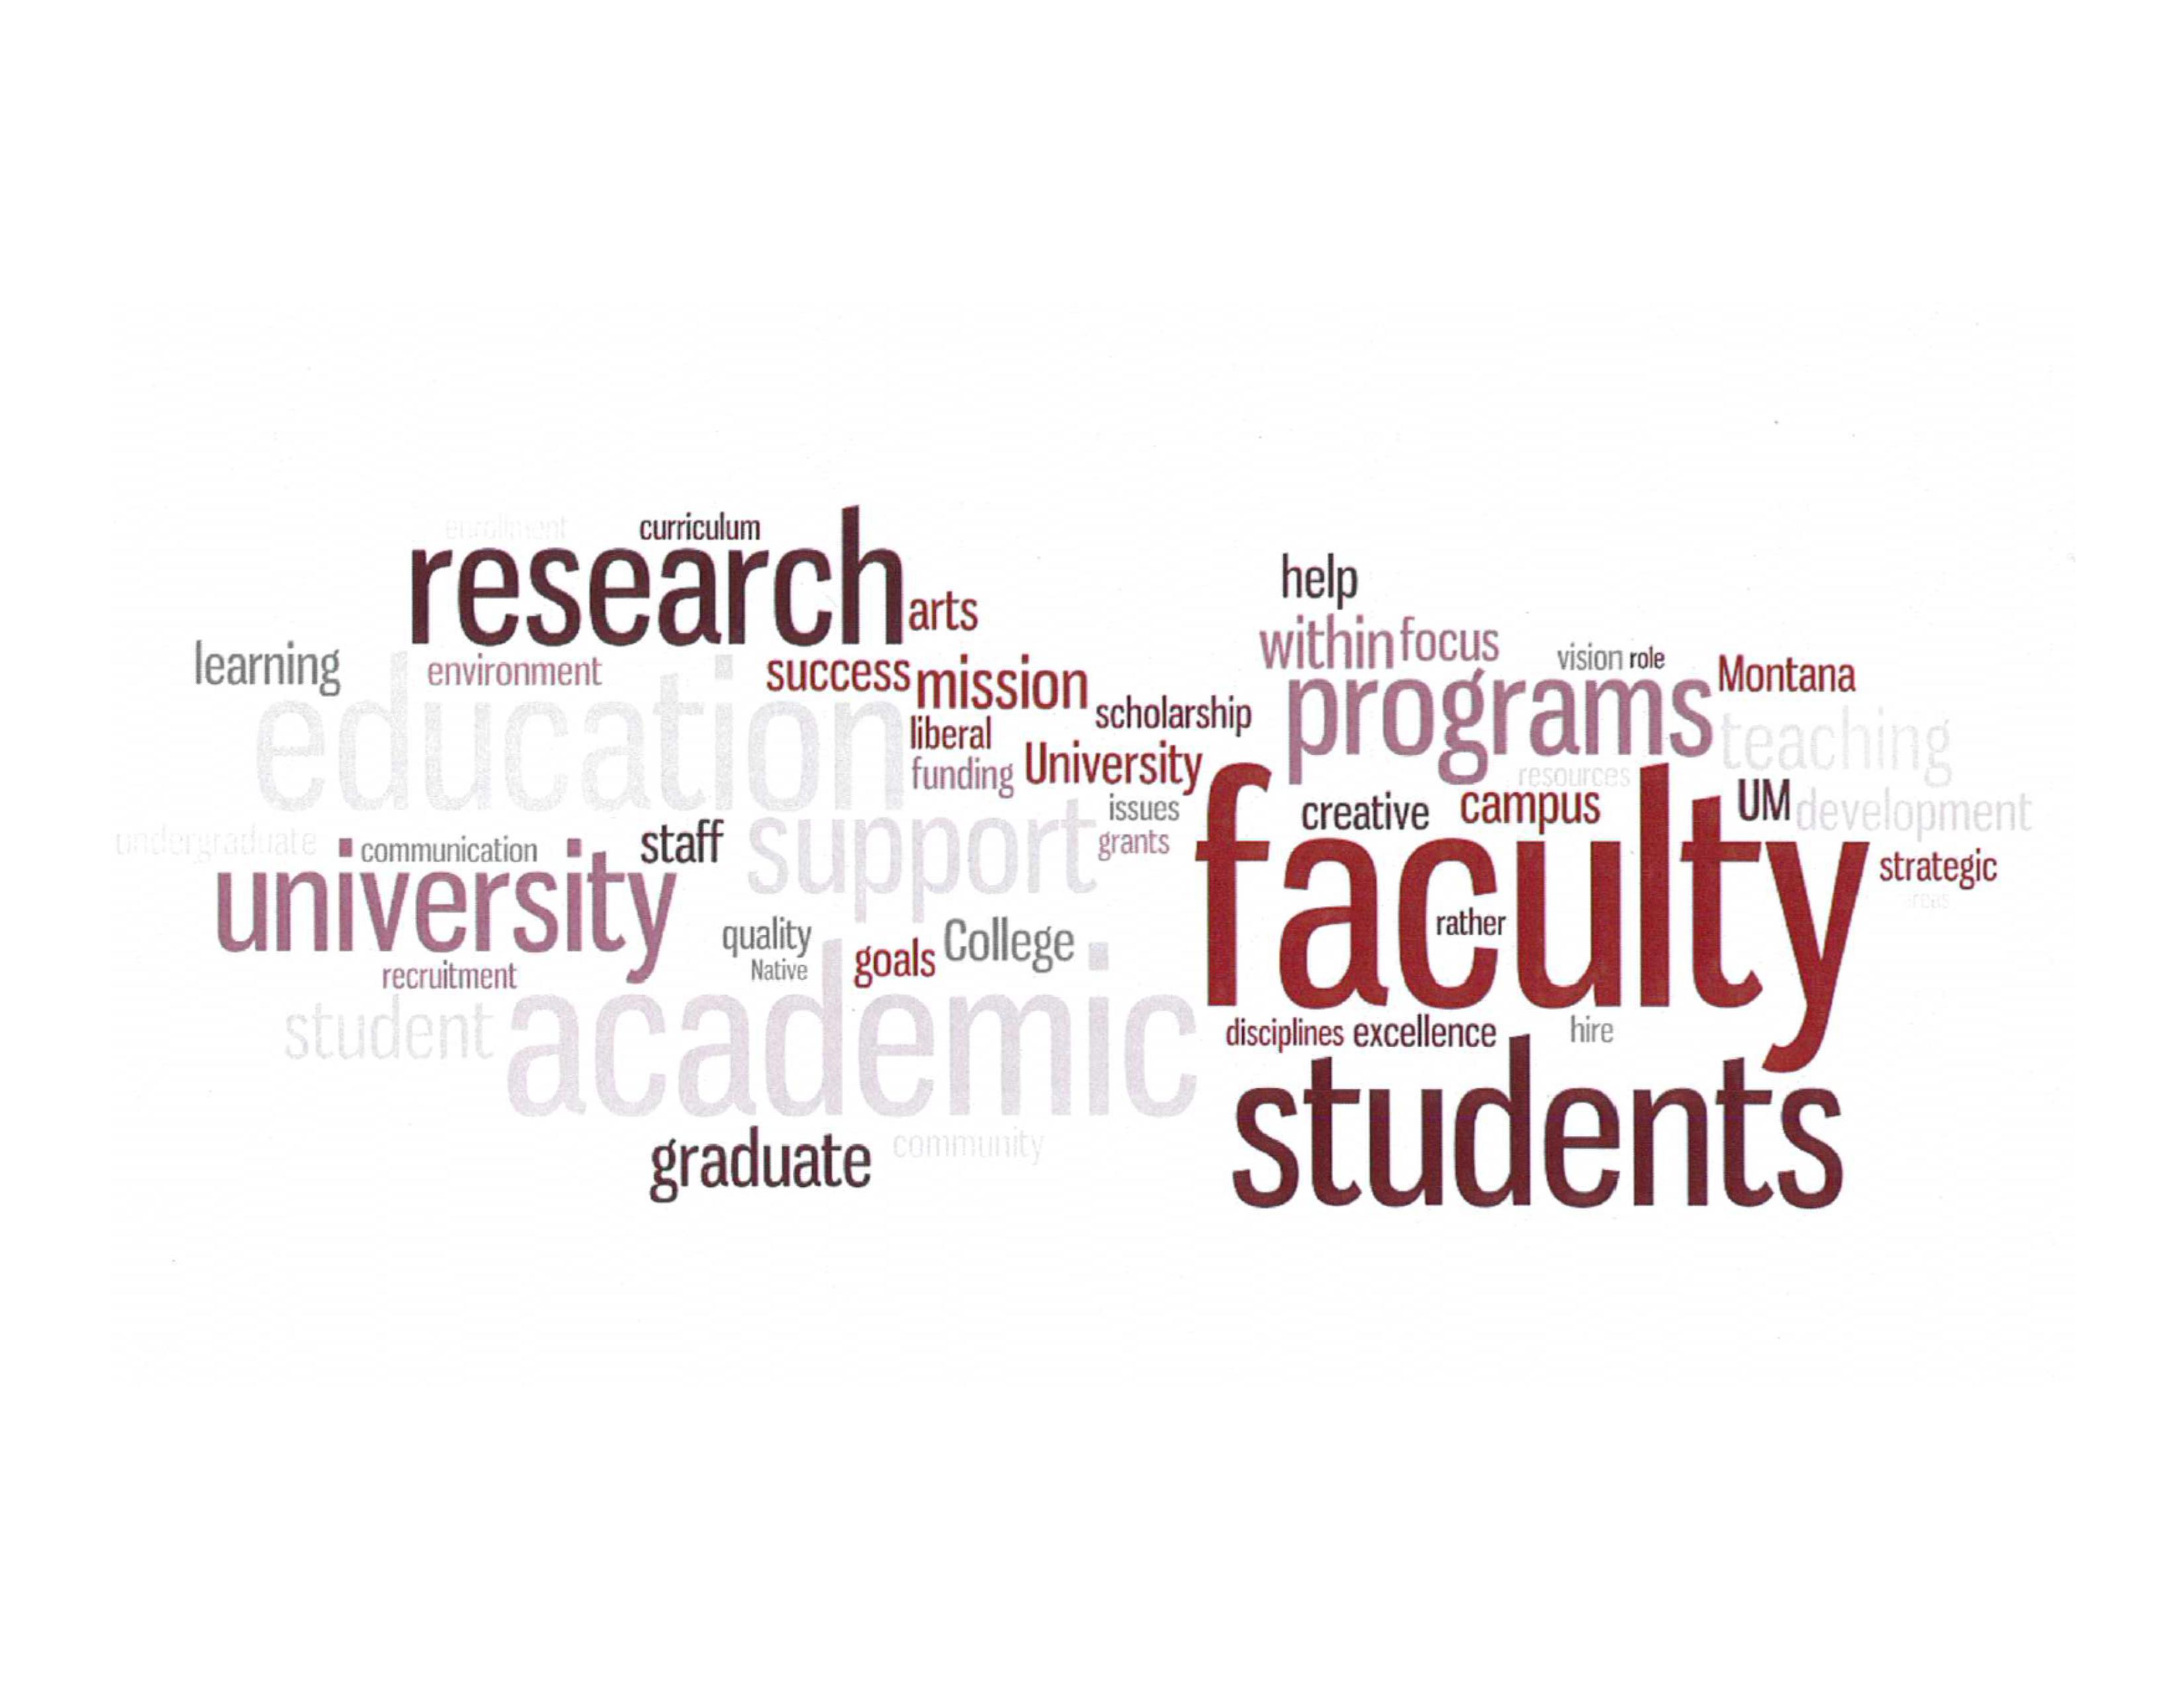 research, faculty, students, programs, university